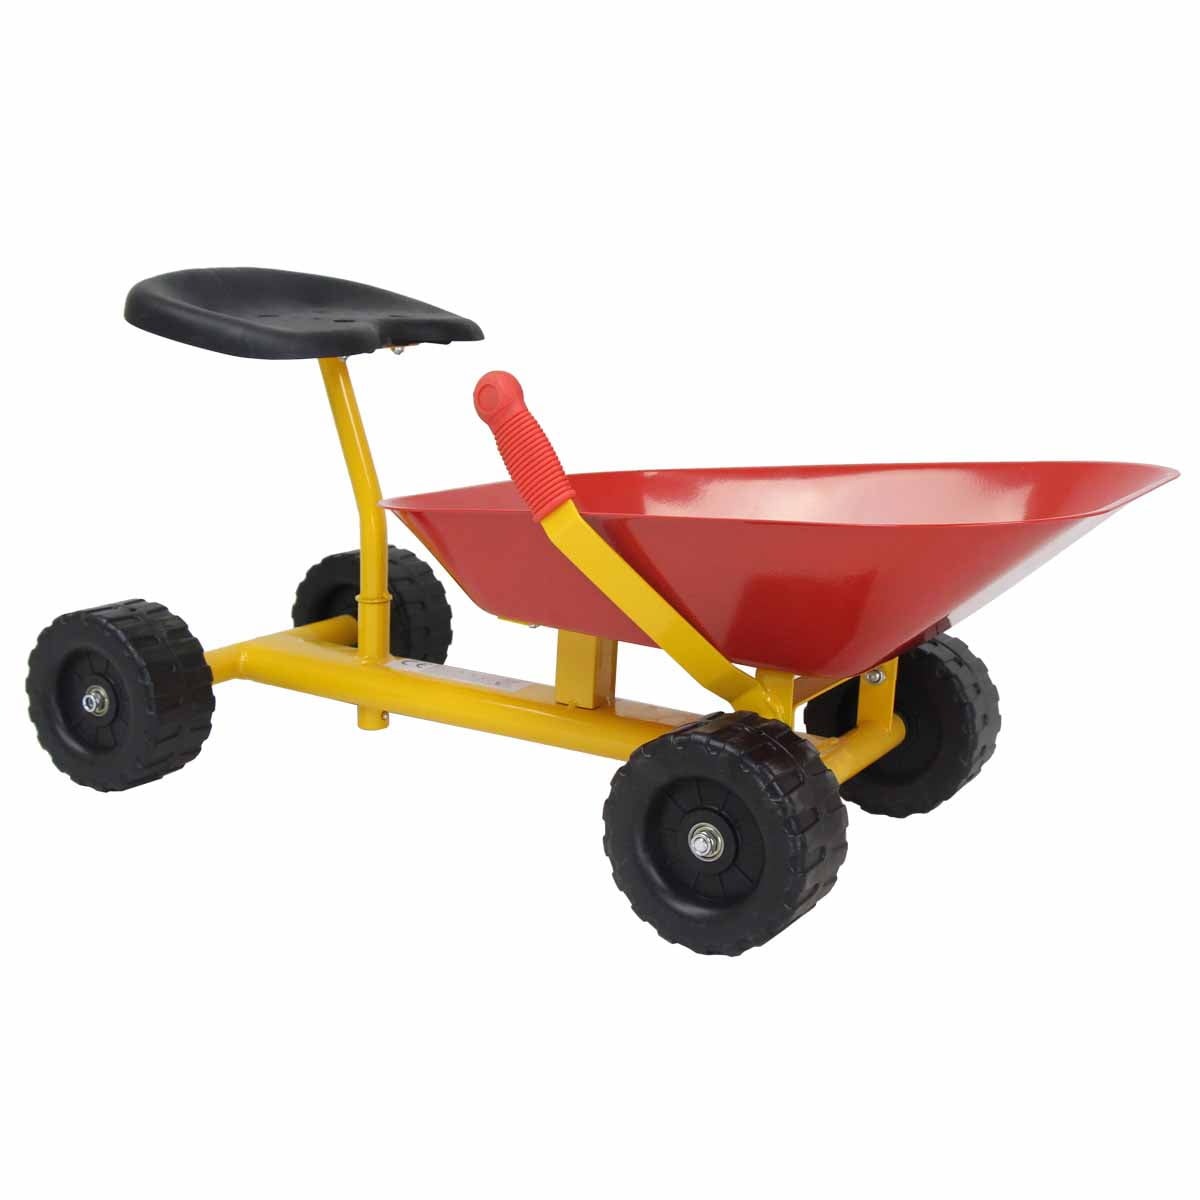 Details about   Topbuy Sand Dumper Kid Ride-on Sand Digger Heavy Duty Digging Scooper Toy Red 